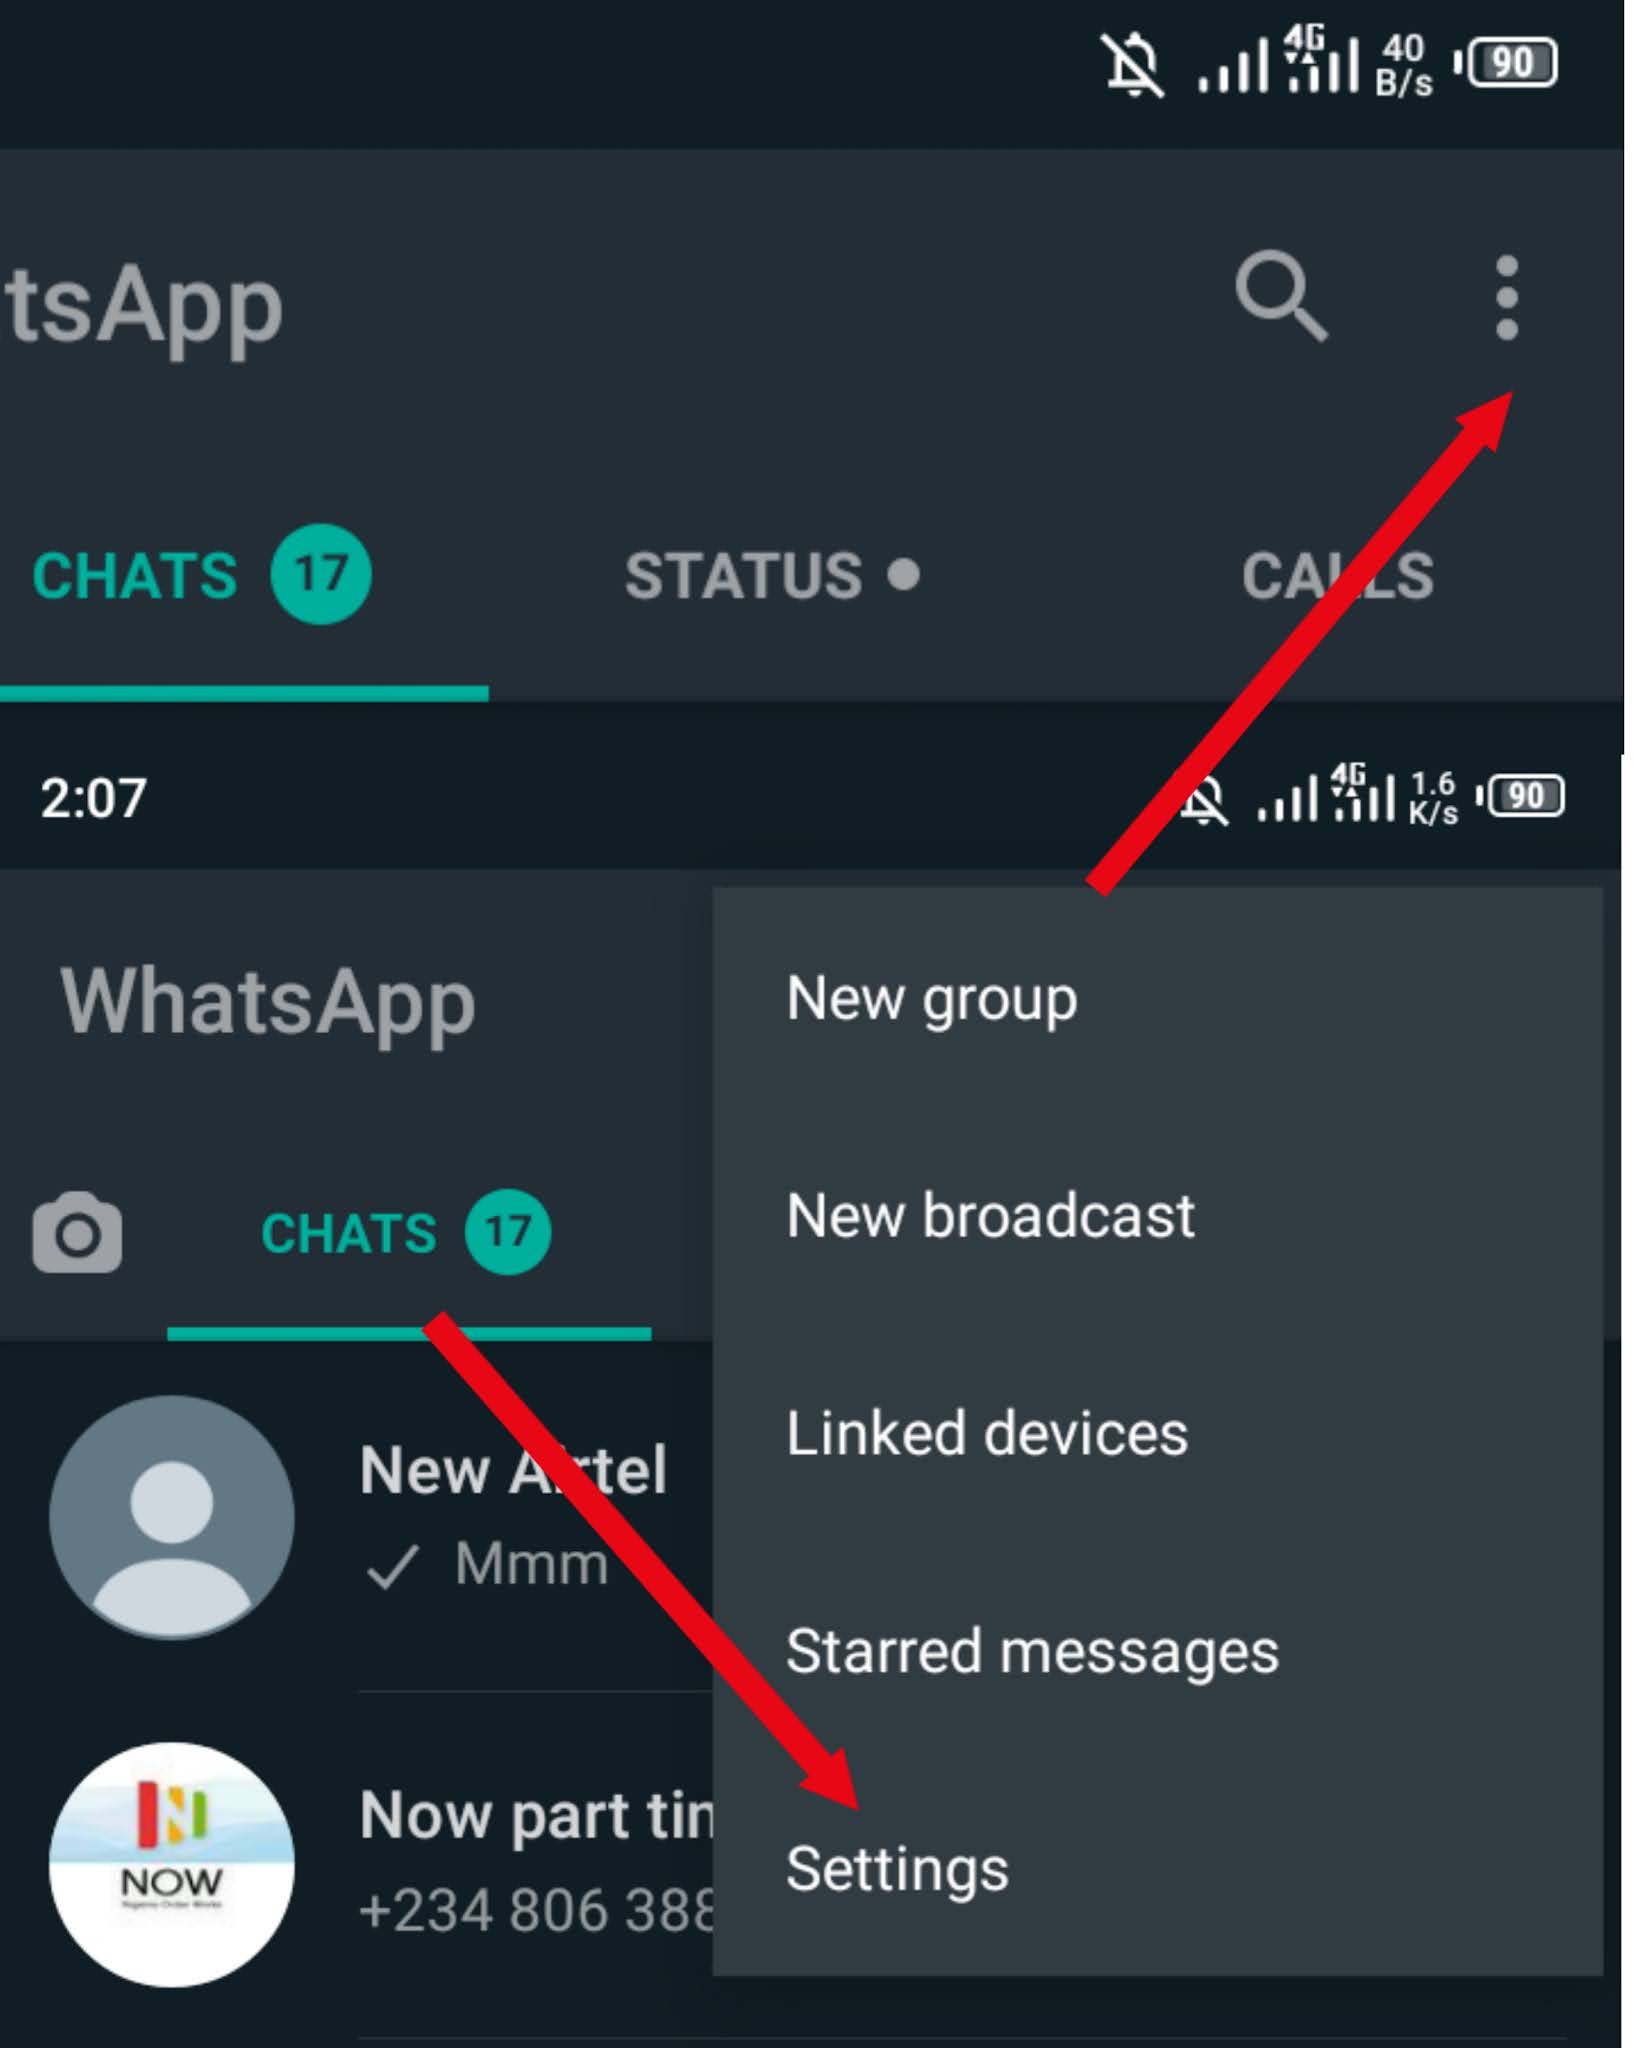 How To Restrict People From Adding You To WhatsApp Group Without Your Permission